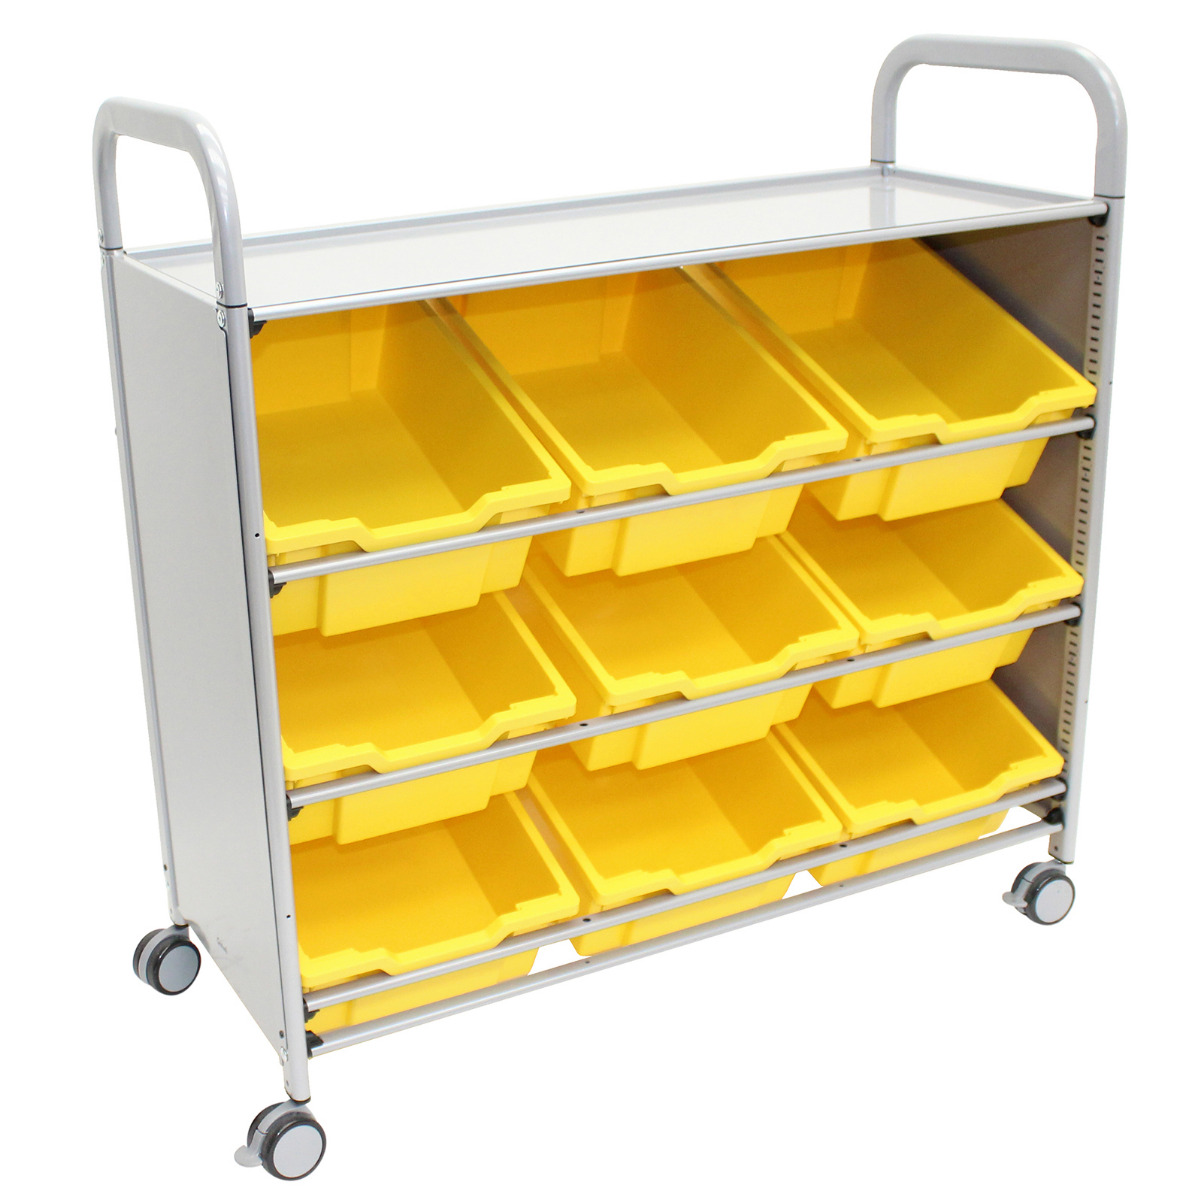 CalStor Library Unit 9 Deep Trays